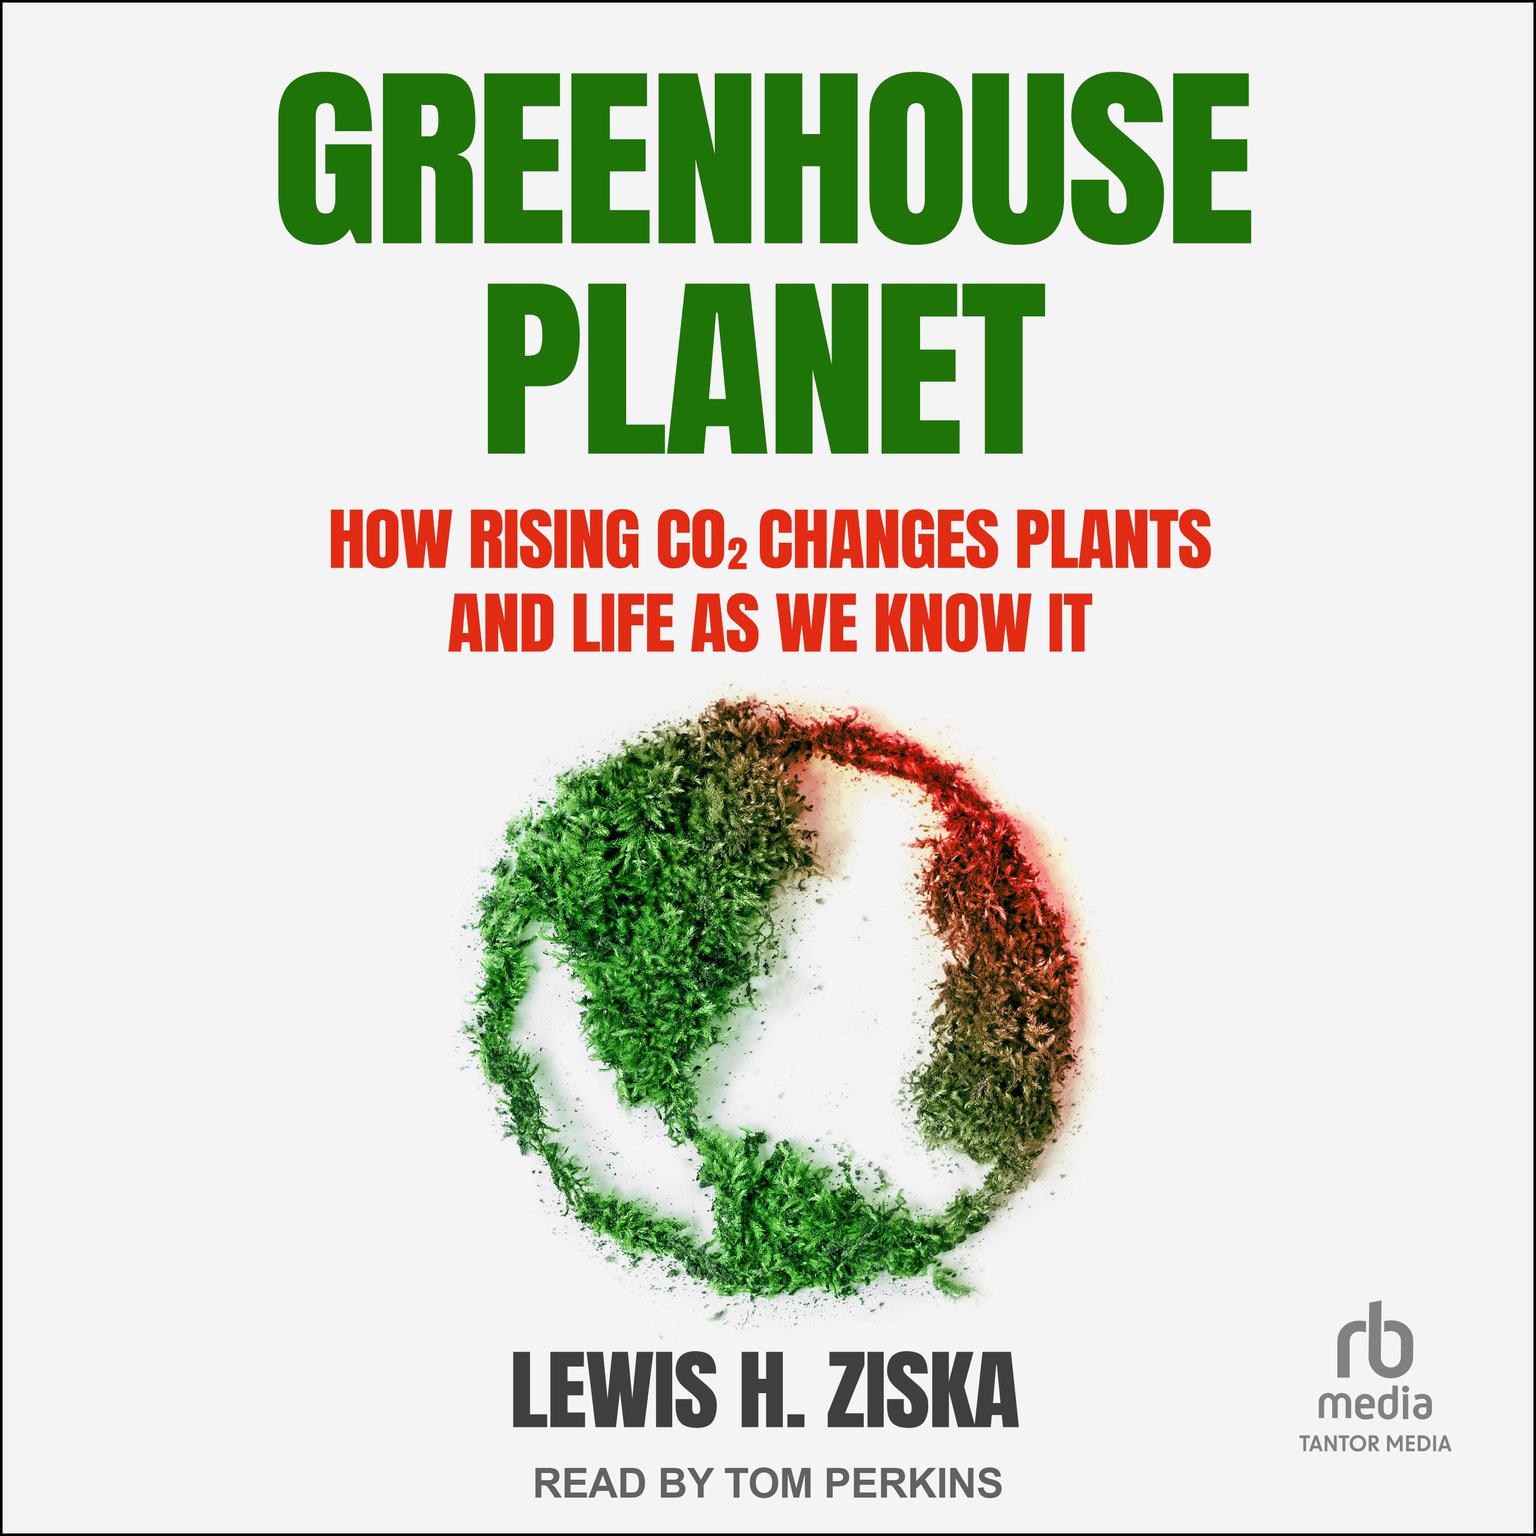 Greenhouse Planet: How Rising CO2 Changes Plants and Life as We Know It Audiobook, by Lewis H. Ziska